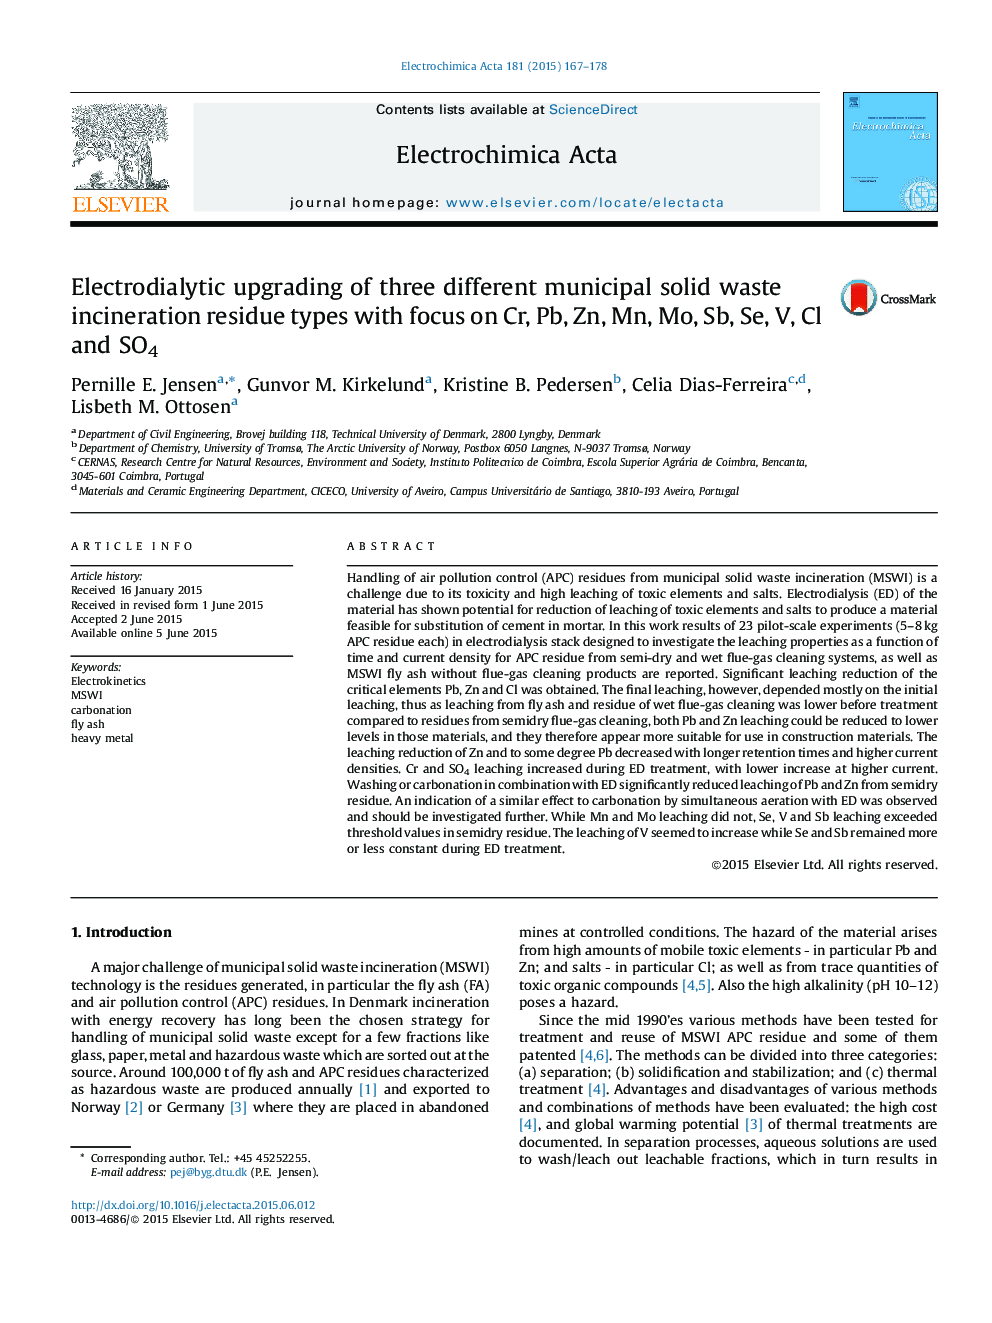 Electrodialytic upgrading of three different municipal solid waste incineration residue types with focus on Cr, Pb, Zn, Mn, Mo, Sb, Se, V, Cl and SO4